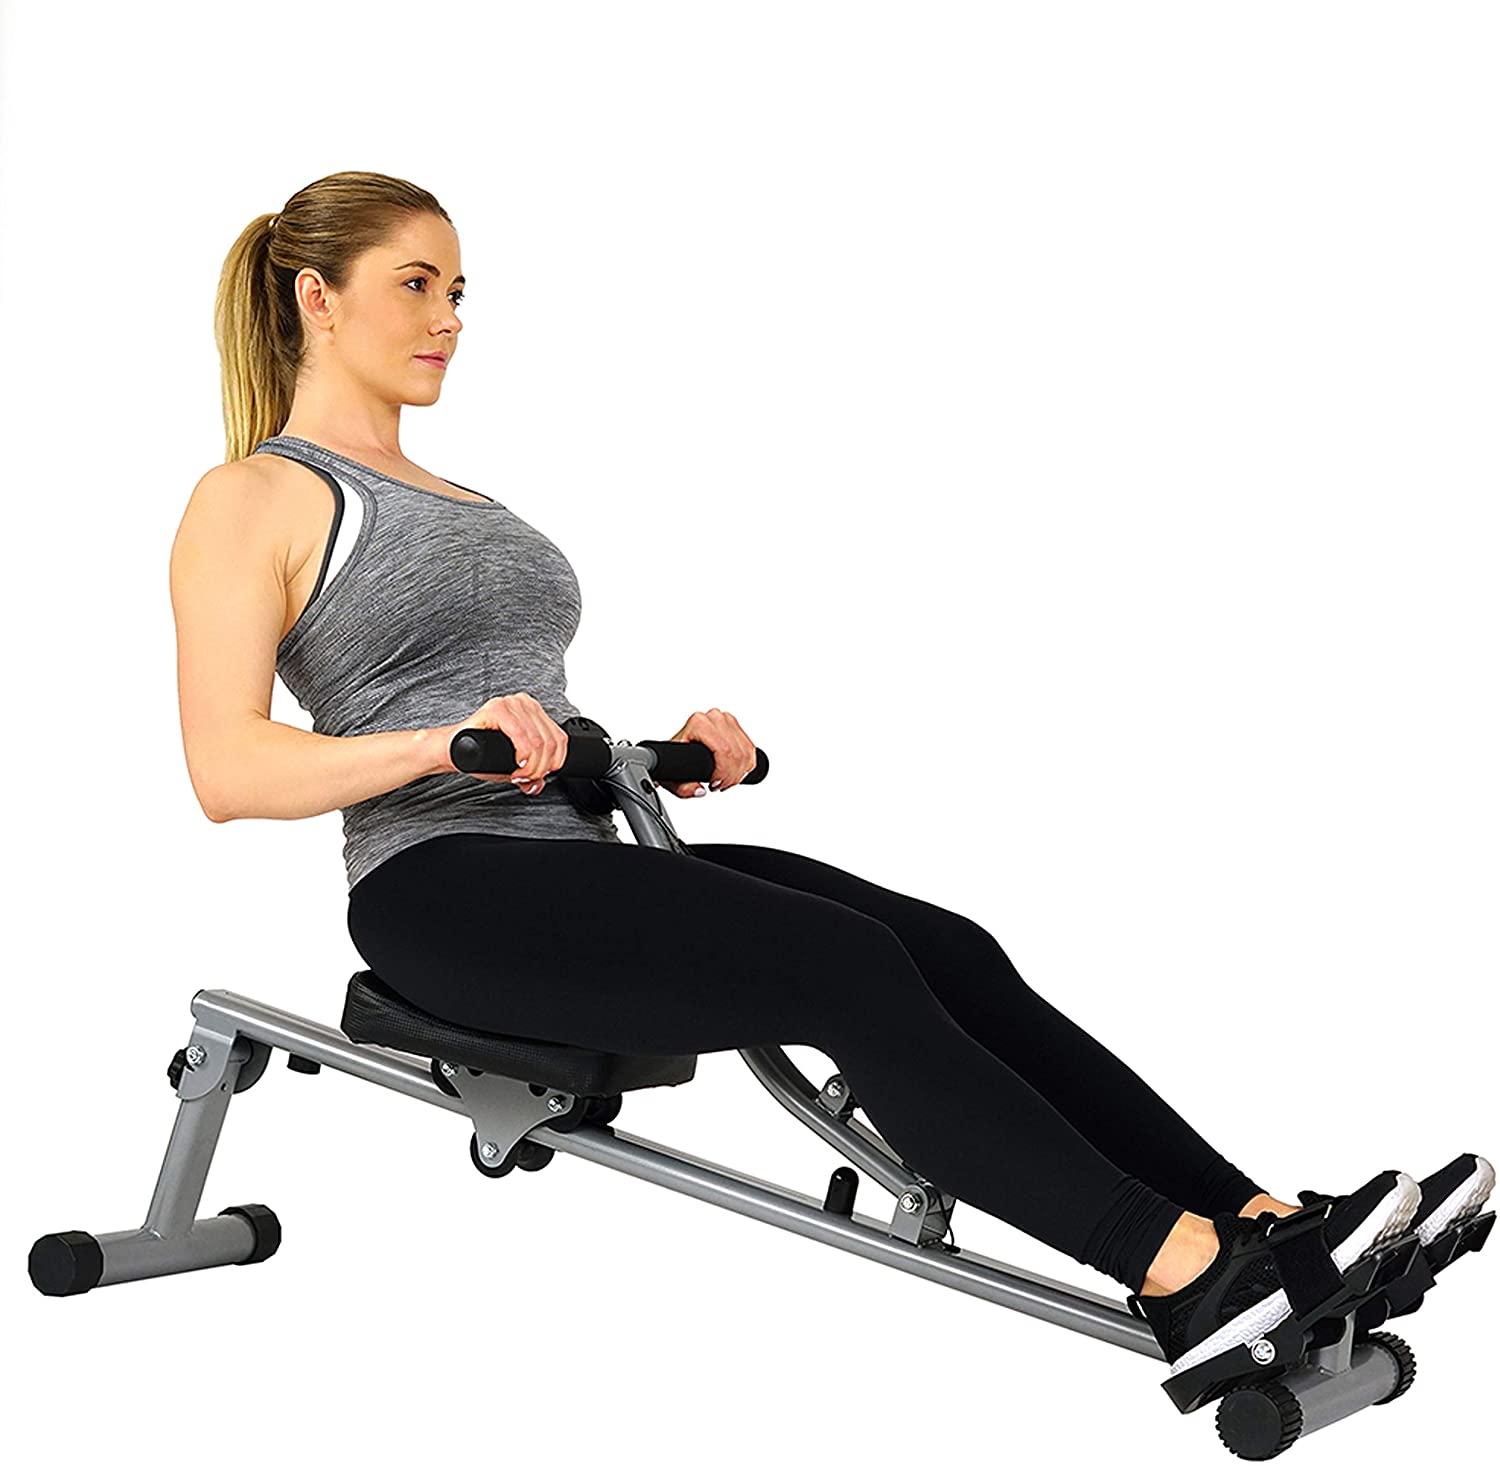 10 best rowing machines for whole body home exercise 2021 herstylecode 7 10 Best Rowing Machines for Whole Body Home Exercise 2022